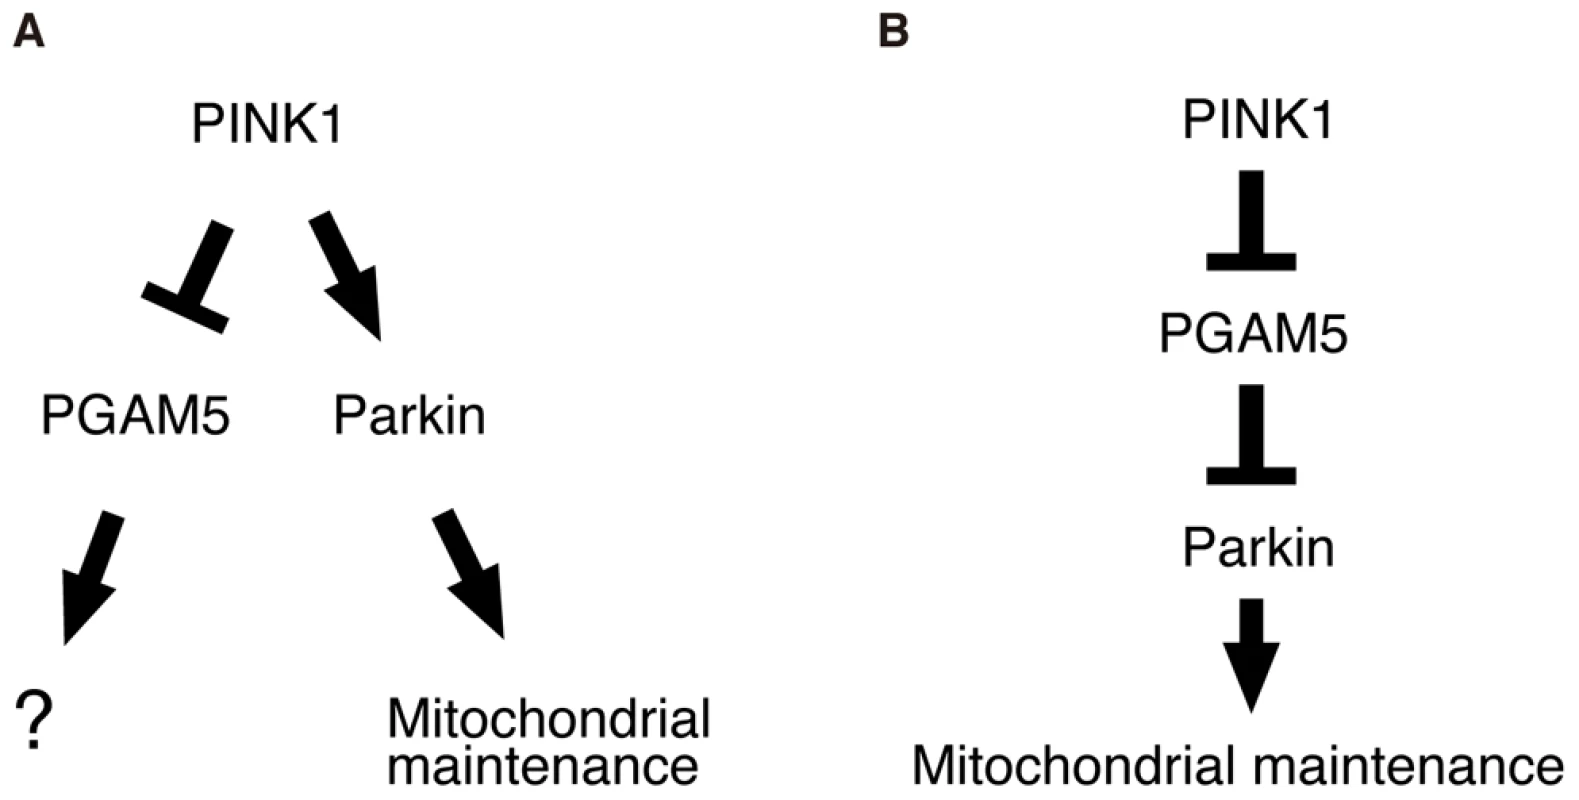 Schematic of the proposed PINK1/PGAM5 pathways in <i>Drosophila</i>.